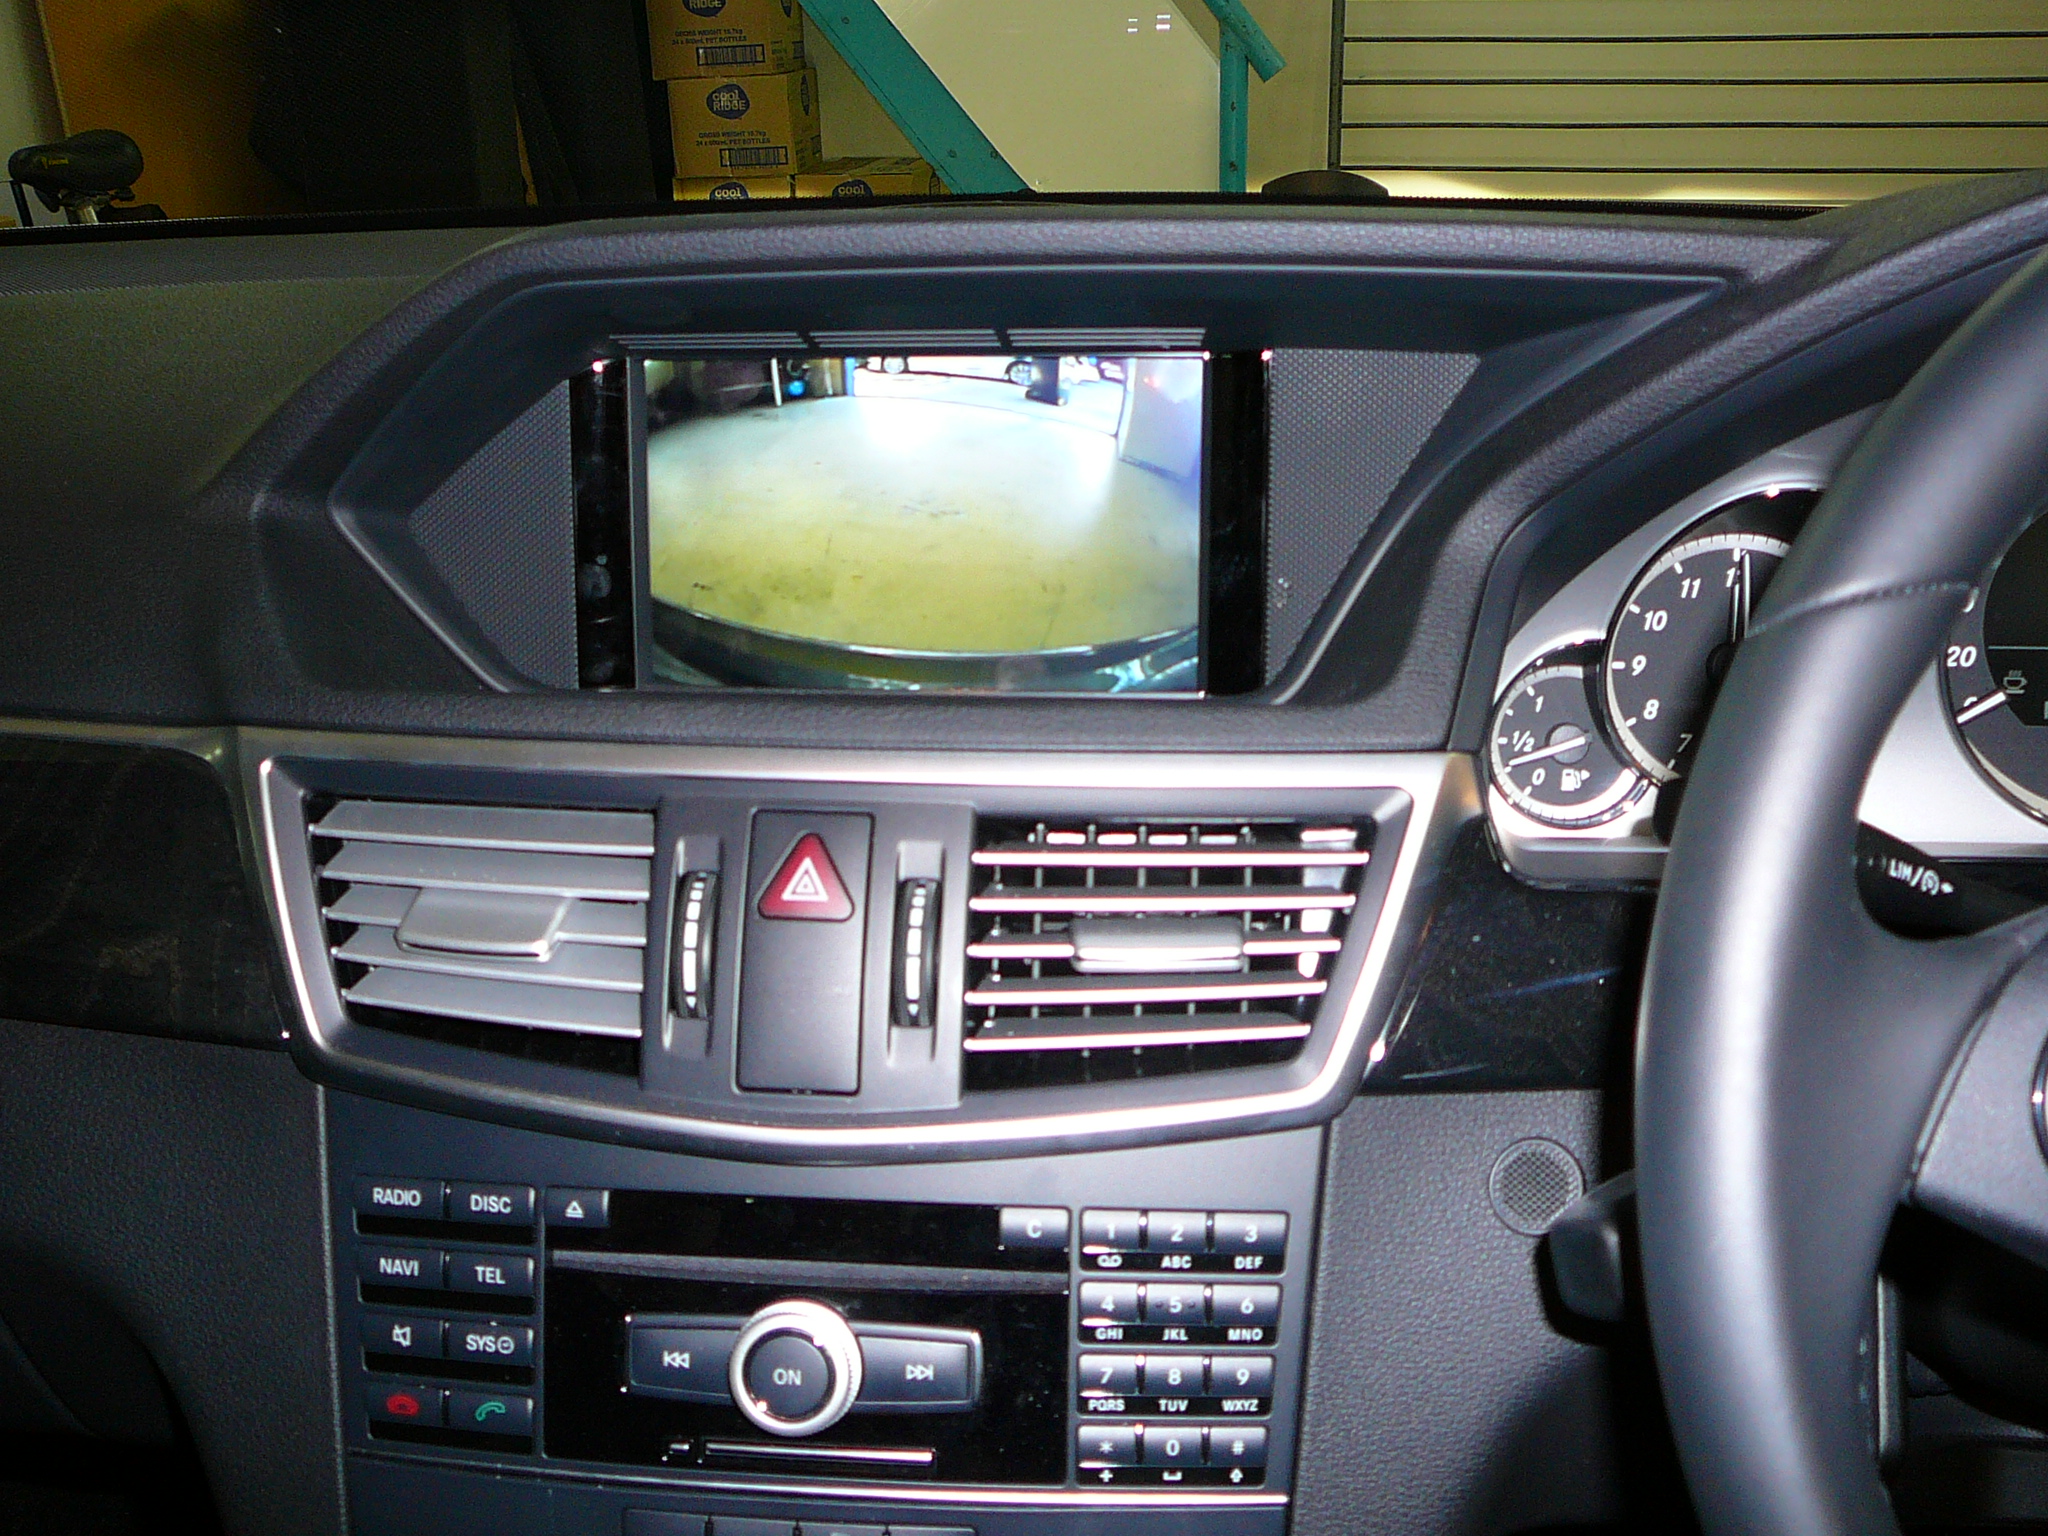 Mercedes Benz 2011 E Class with an aftermarket Reverse camera displayed on the factory screen.